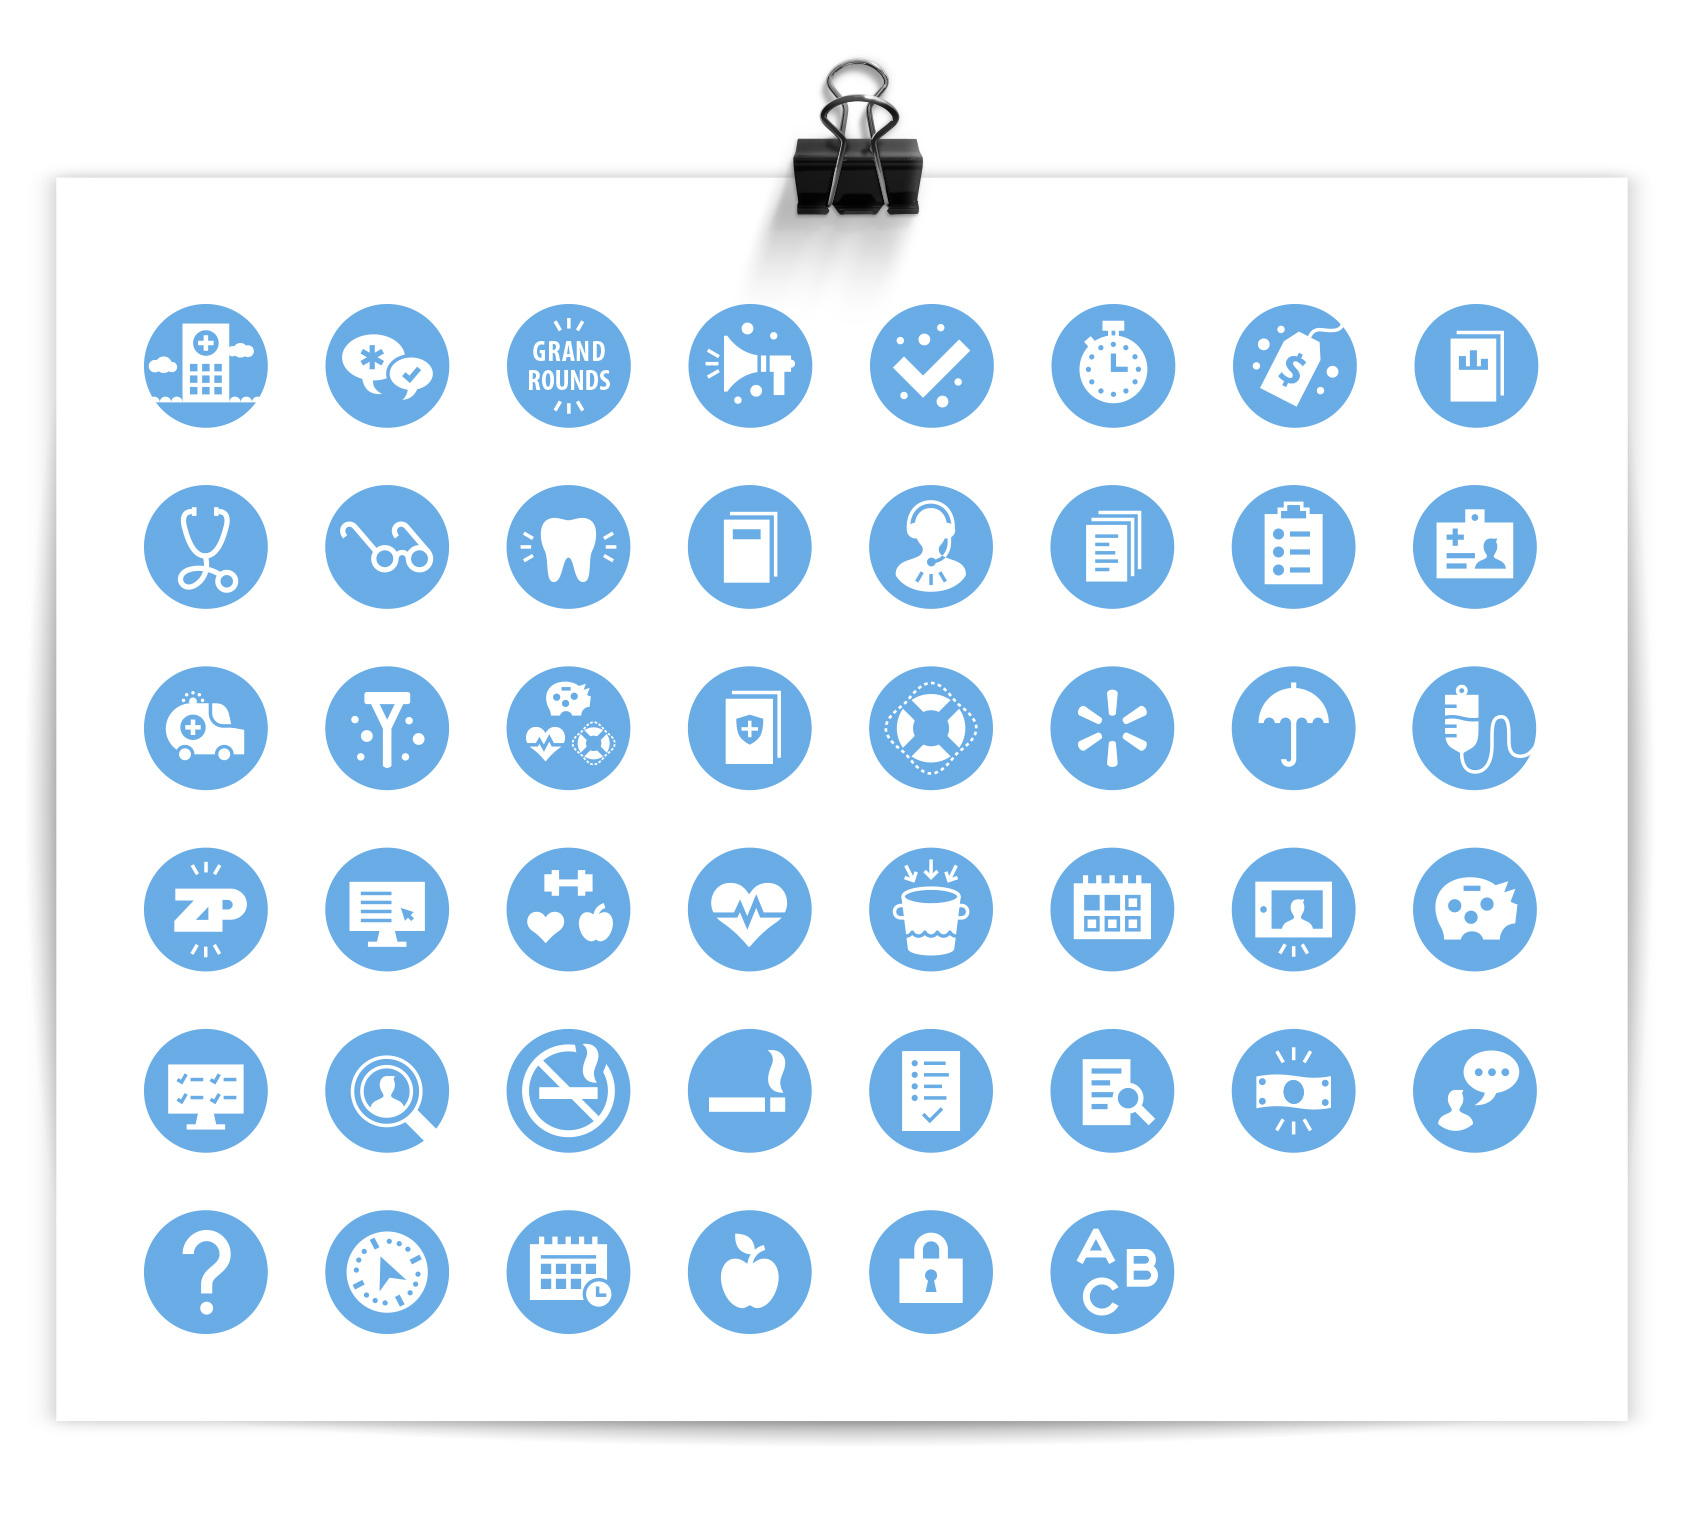 lots and lots of icons